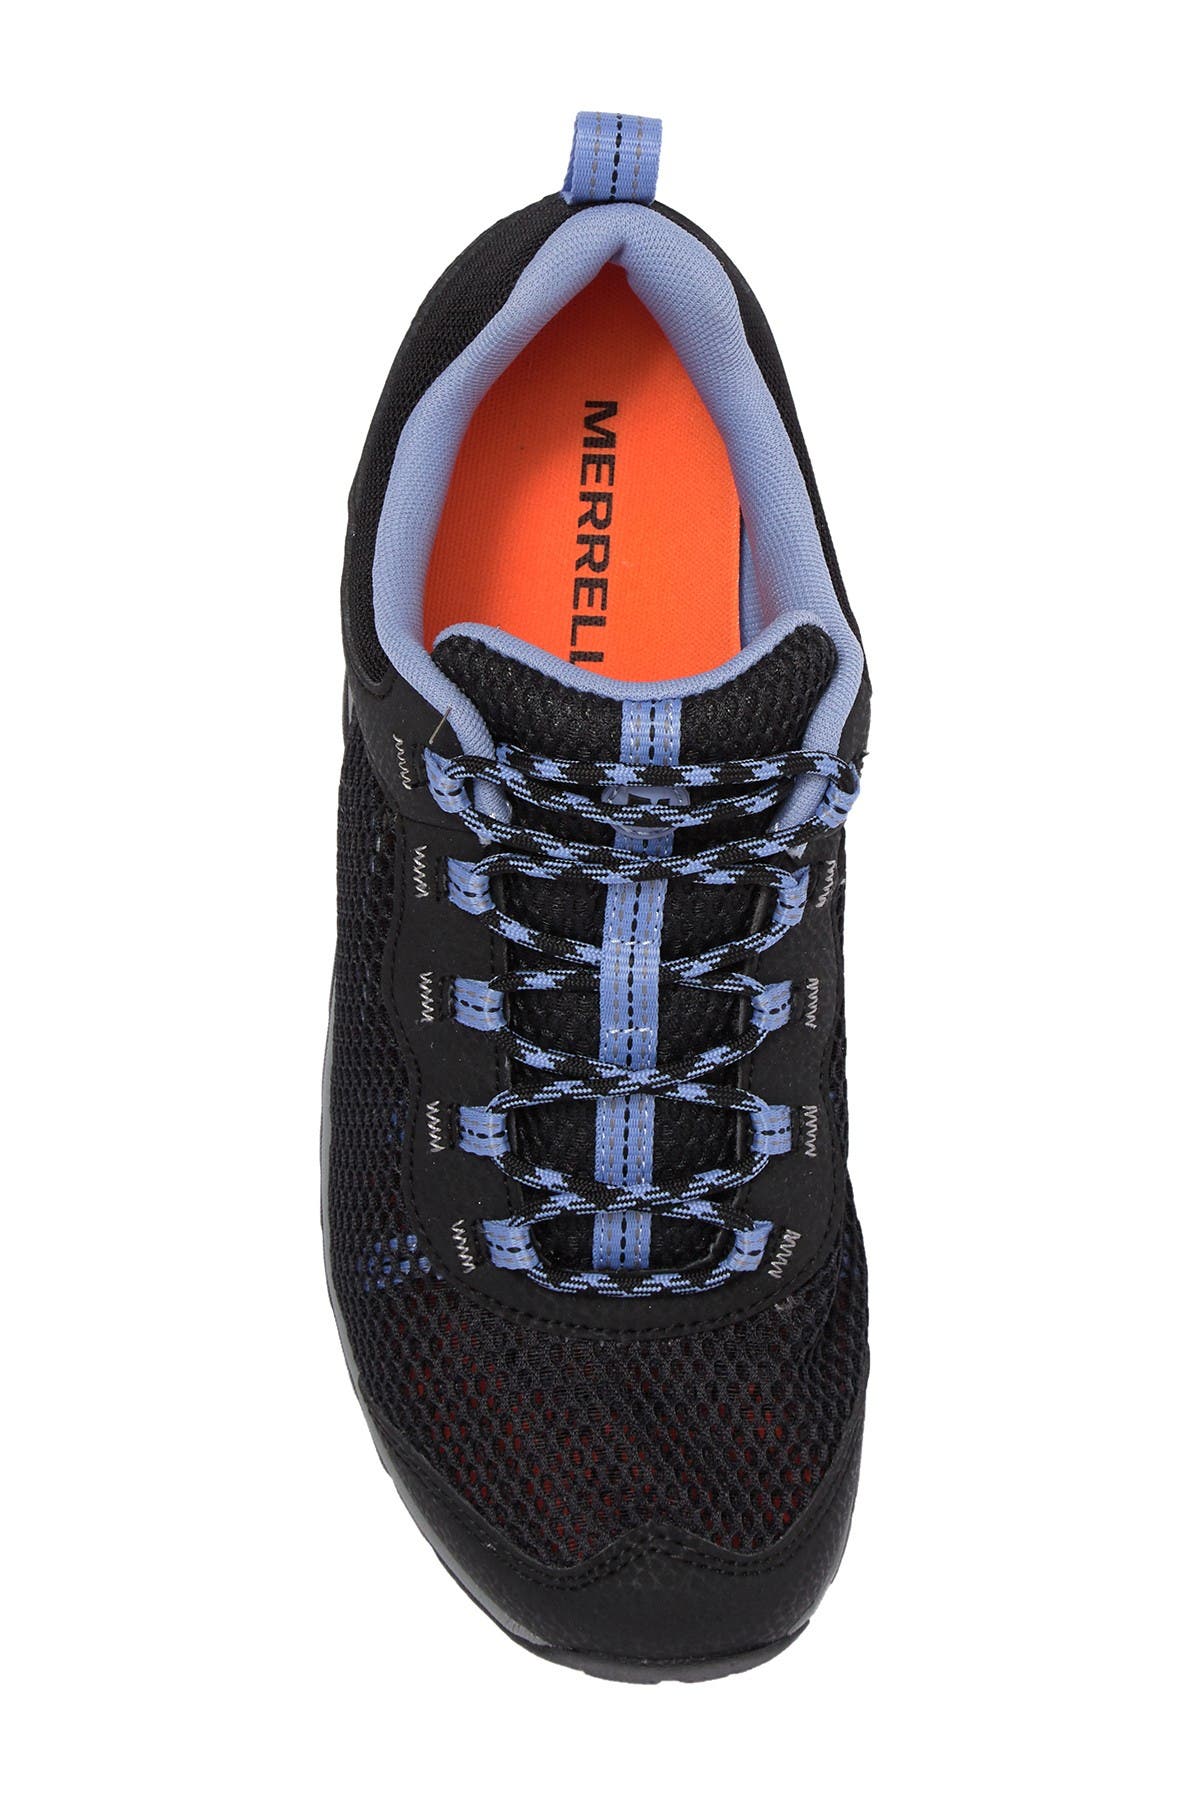 merrell riverbed womens